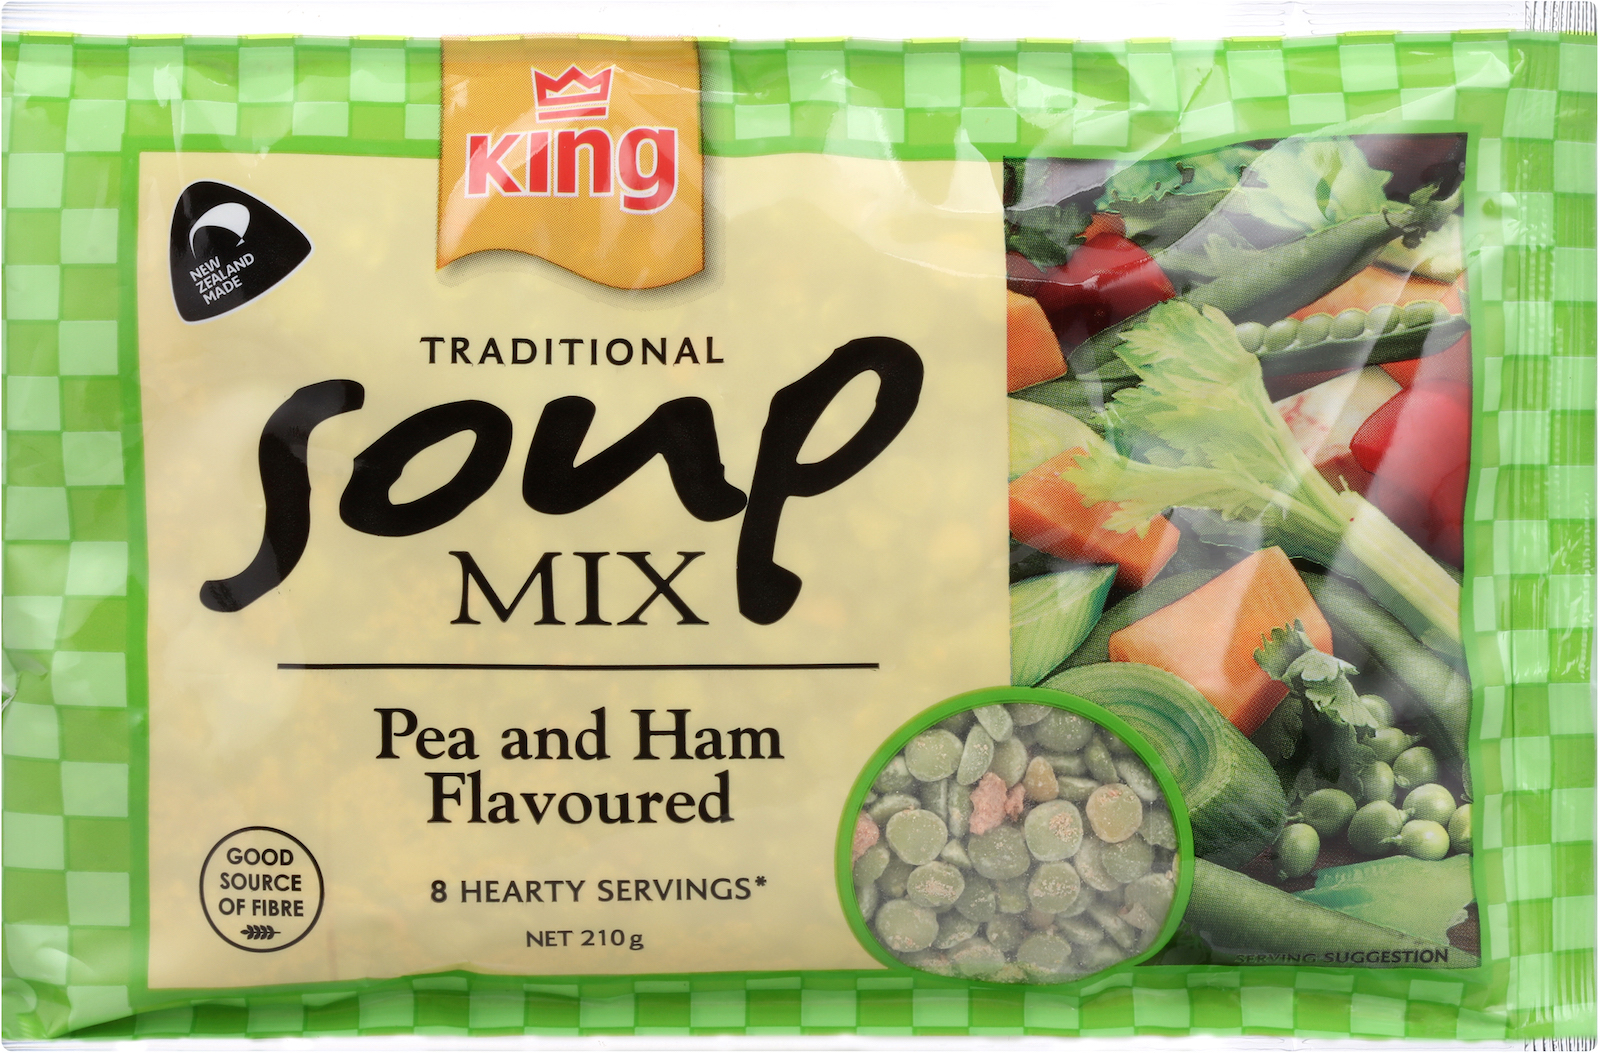 Packet of Pea and Ham King Soup mix